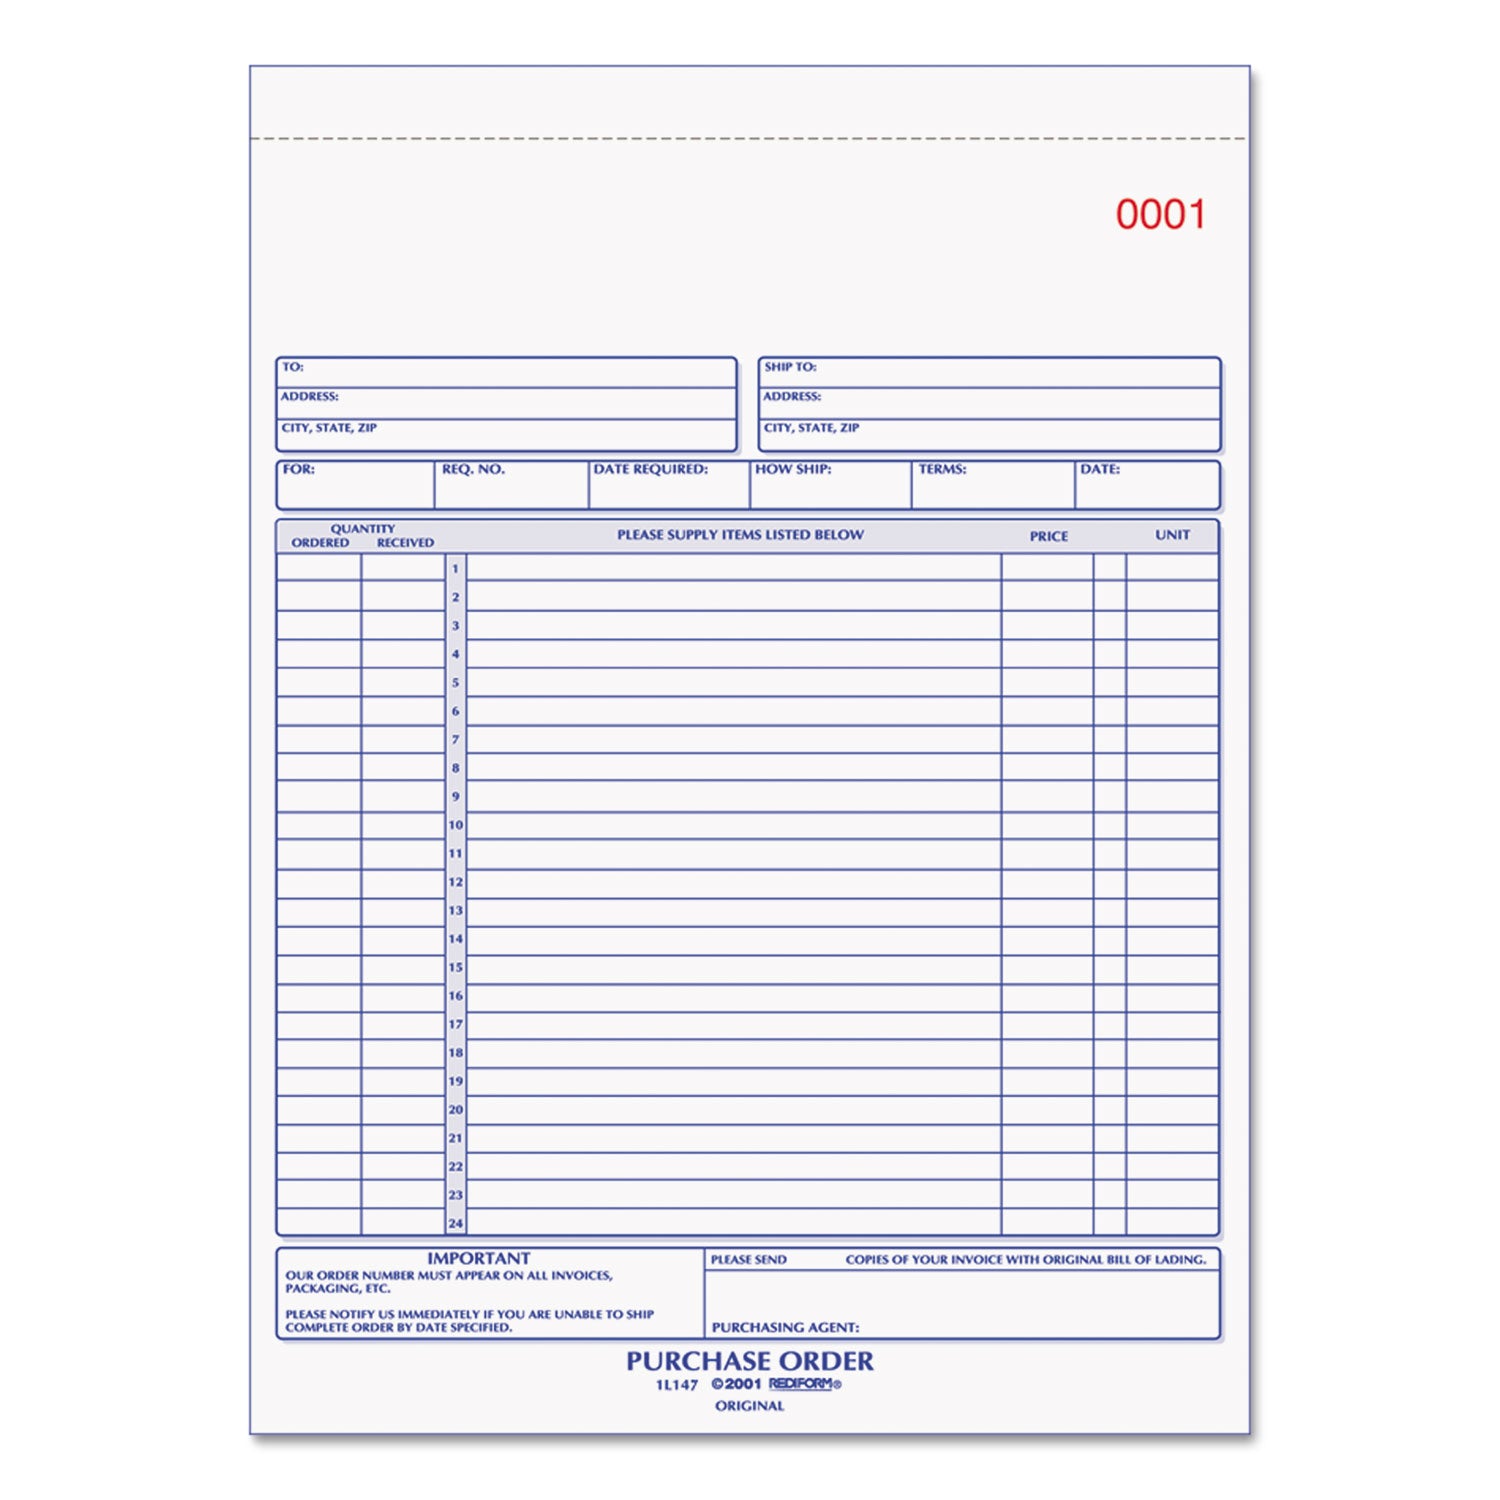 Purchase Order Book, 17 Lines, Three-Part Carbonless, 8.5 x 11, 50 Forms Total - 